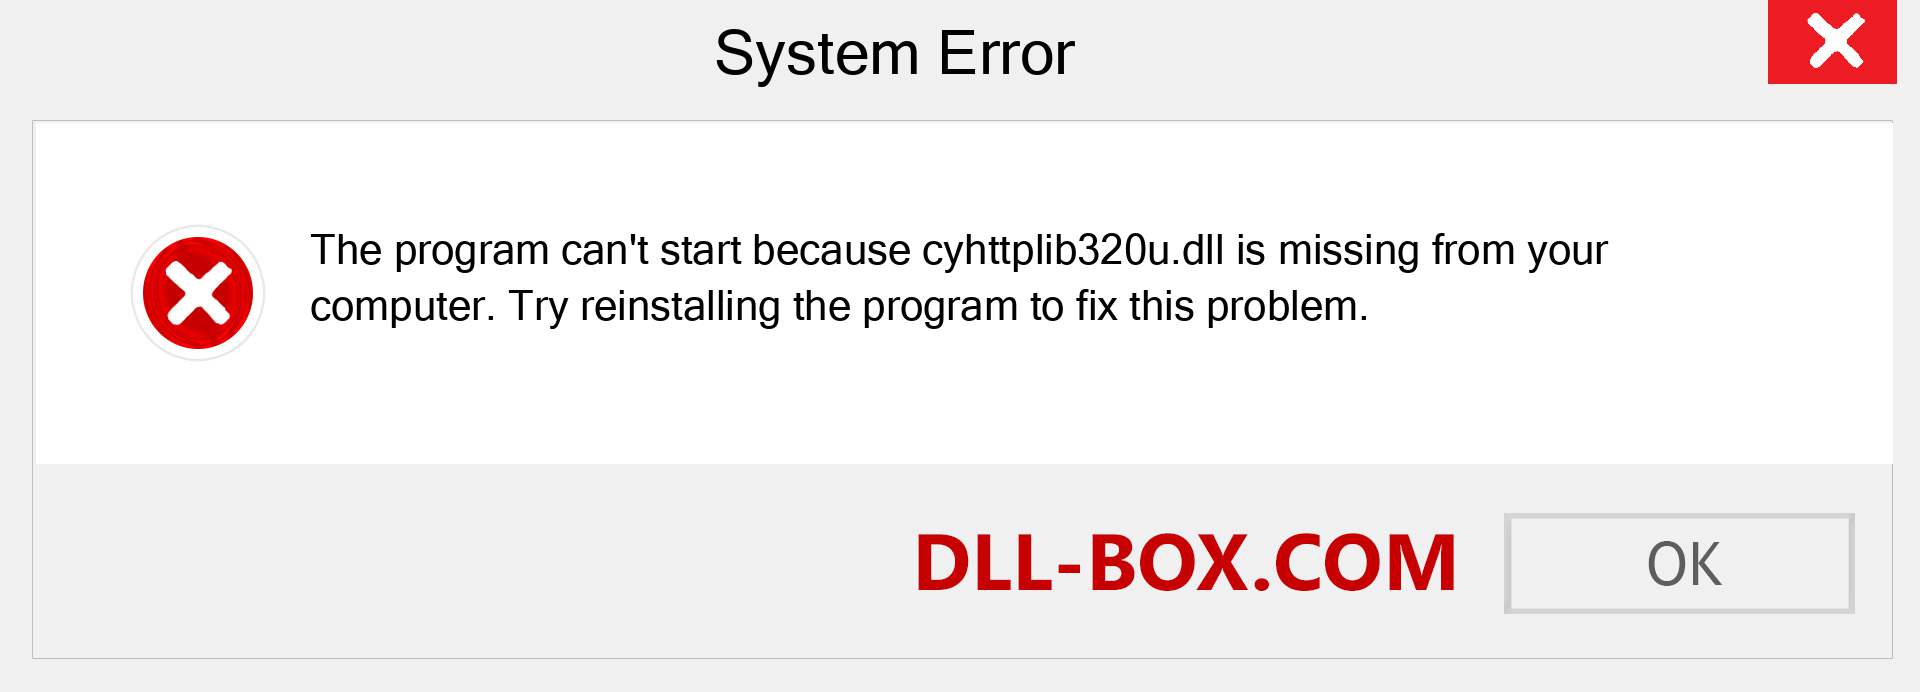  cyhttplib320u.dll file is missing?. Download for Windows 7, 8, 10 - Fix  cyhttplib320u dll Missing Error on Windows, photos, images